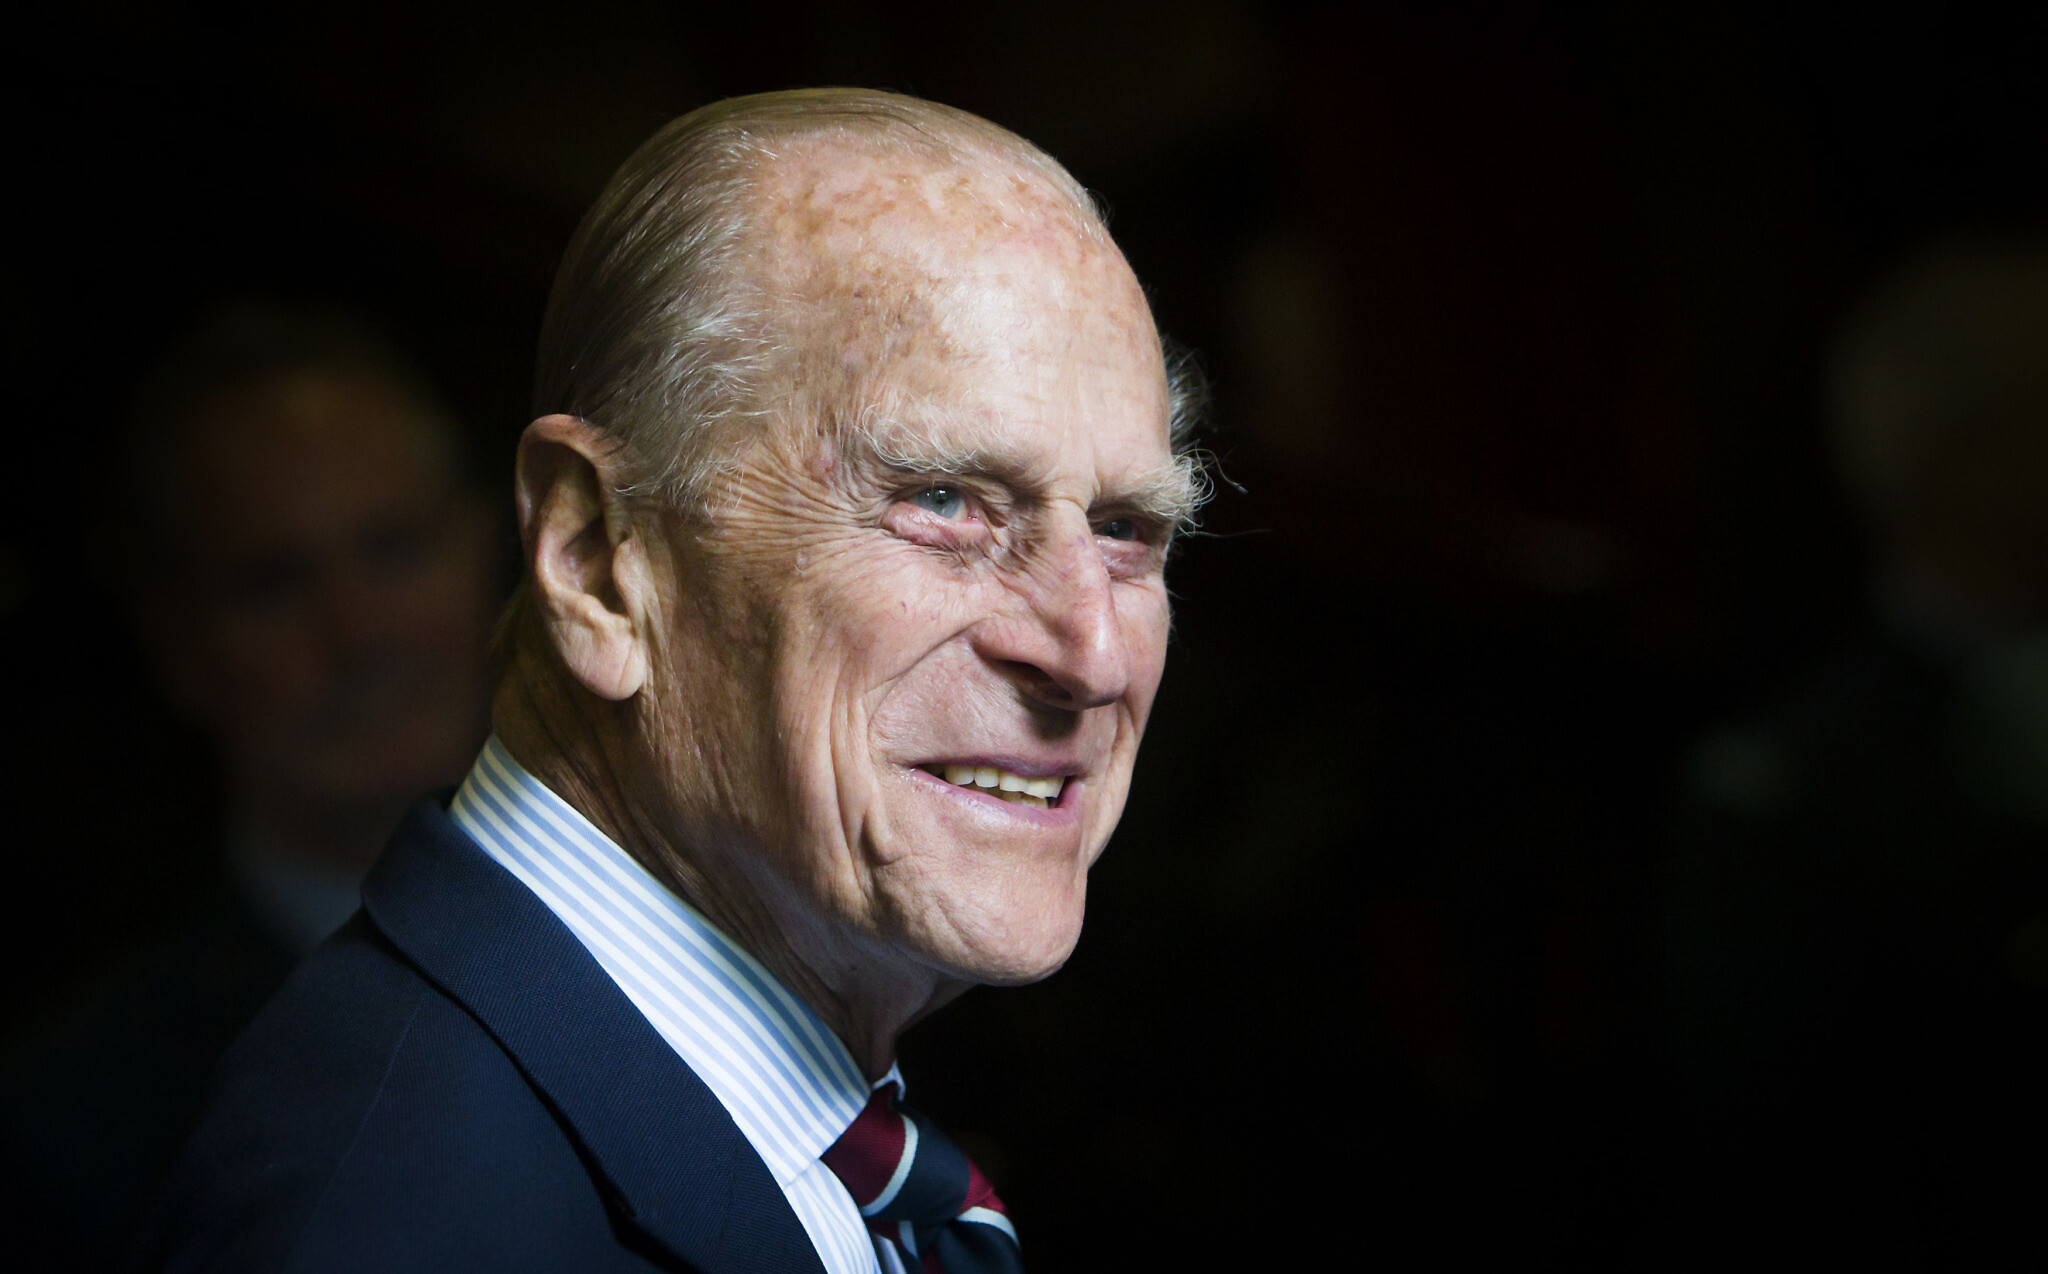 The Duke of Edinburgh during a visit to the headquarters of the Royal Auxiliary Air Force's (RAuxAF) 603 Squadron in Edinburgh Danny Lawson/PA Wire